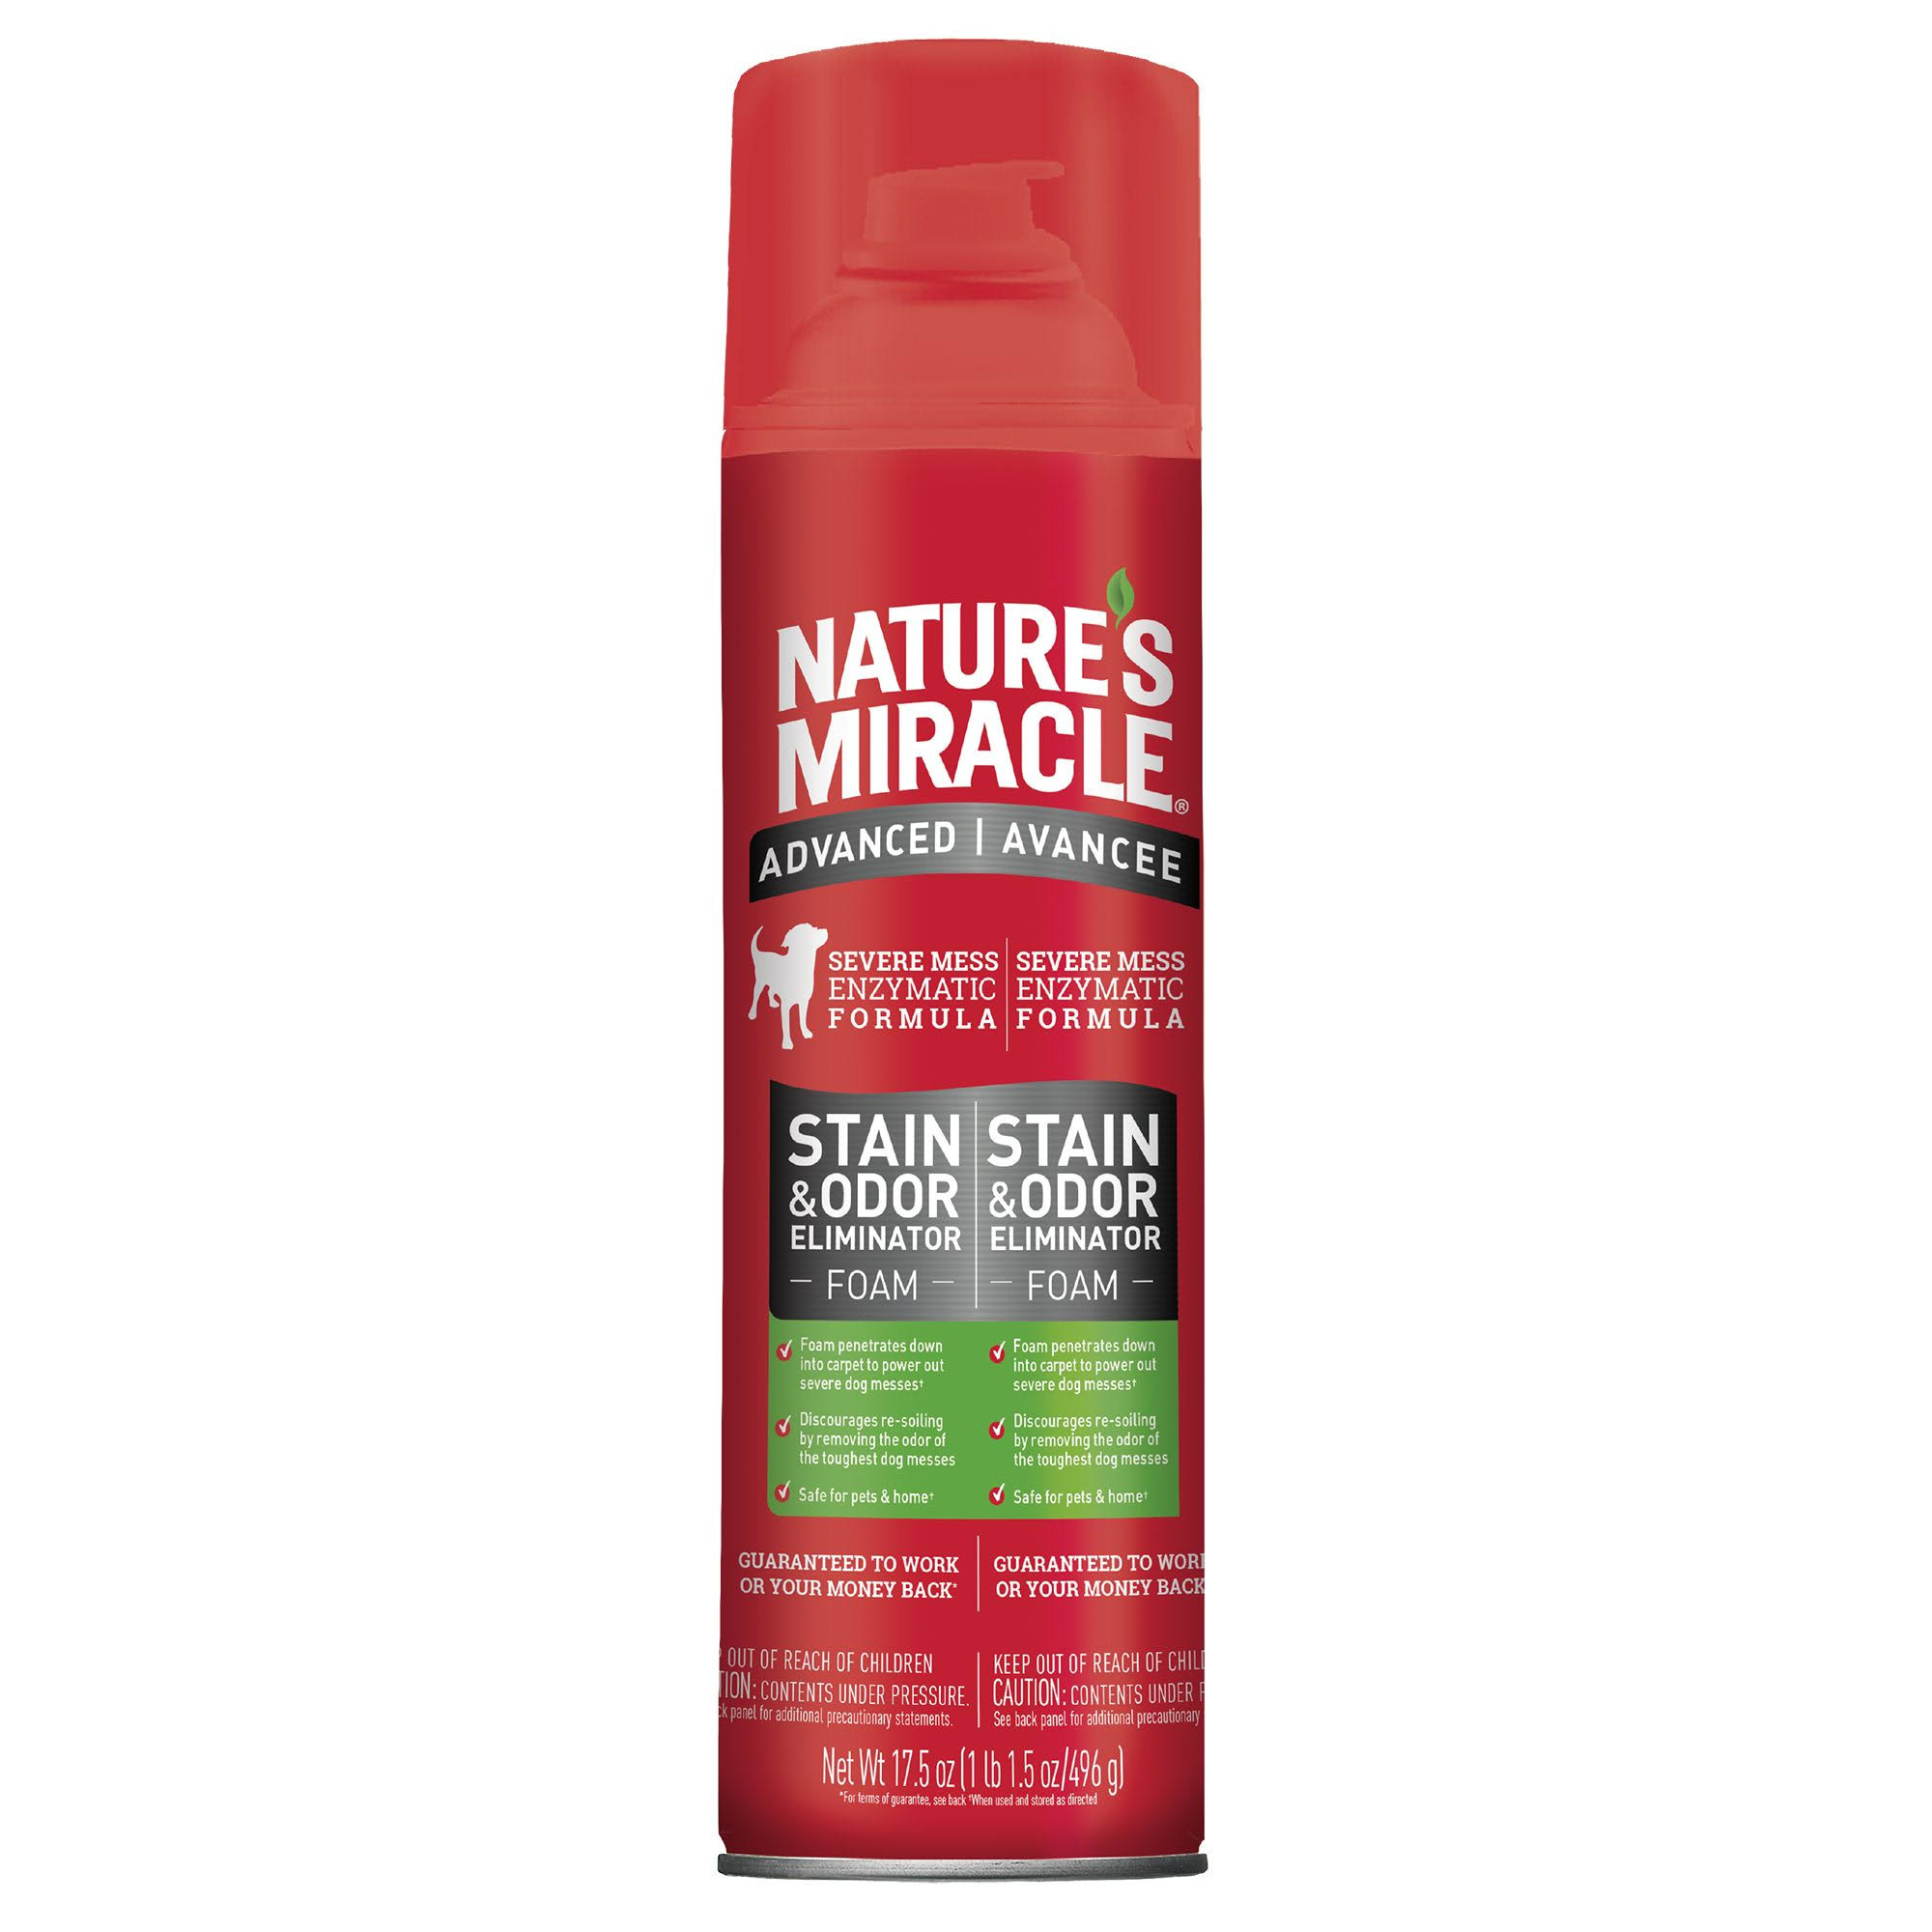 Nature's Miracle Advanced Stain & Odor Eliminator Foam 17.5 oz